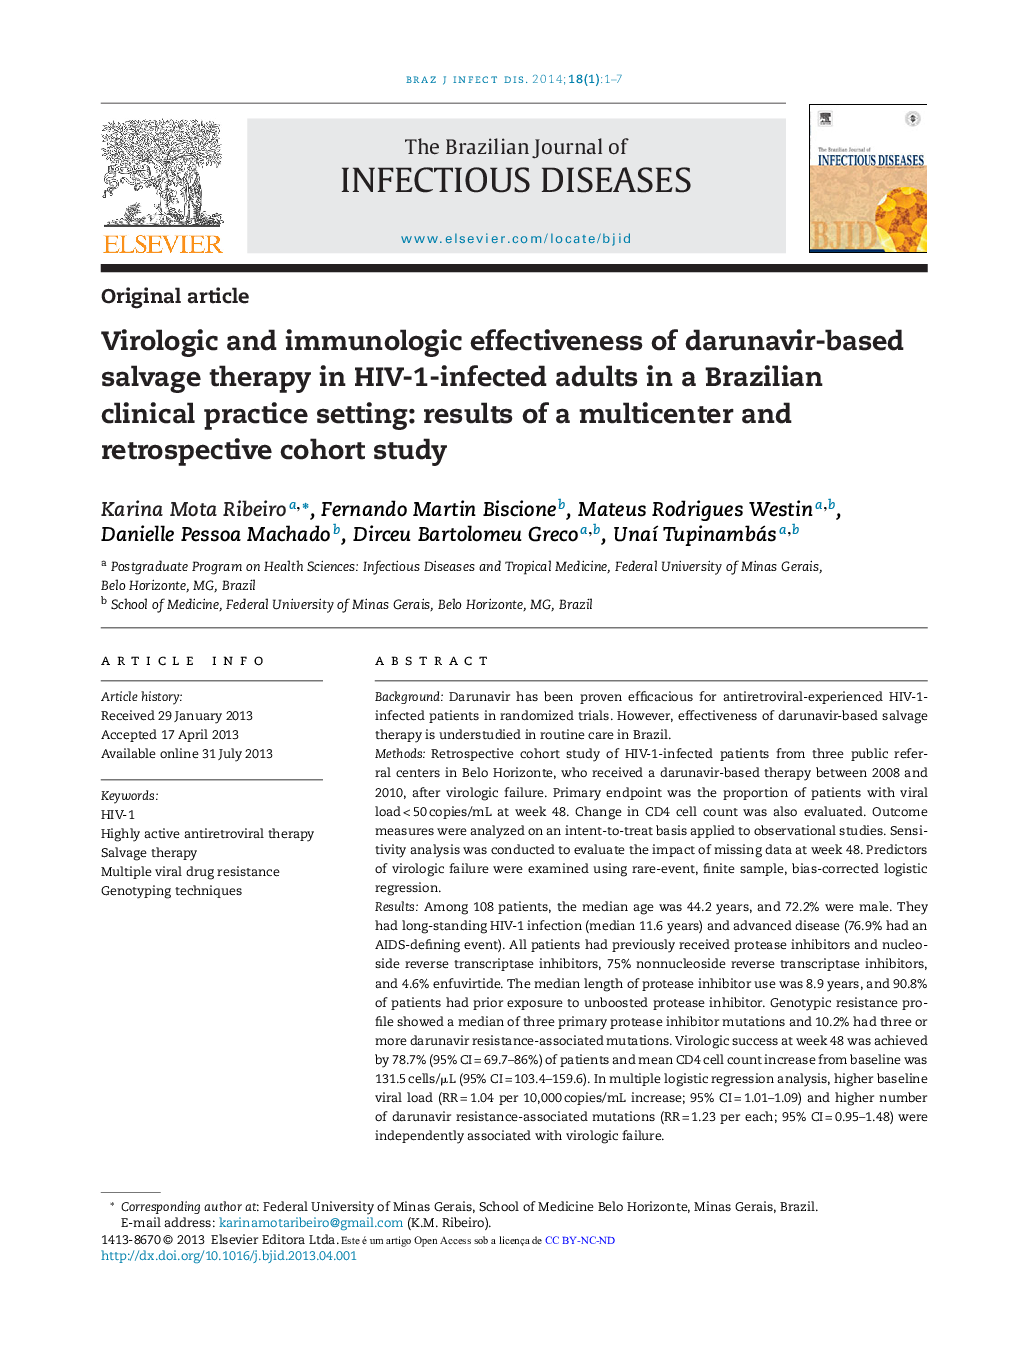 Virologic and immunologic effectiveness of darunavir-based salvage therapy in HIV-1-infected adults in a Brazilian clinical practice setting: results of a multicenter and retrospective cohort study